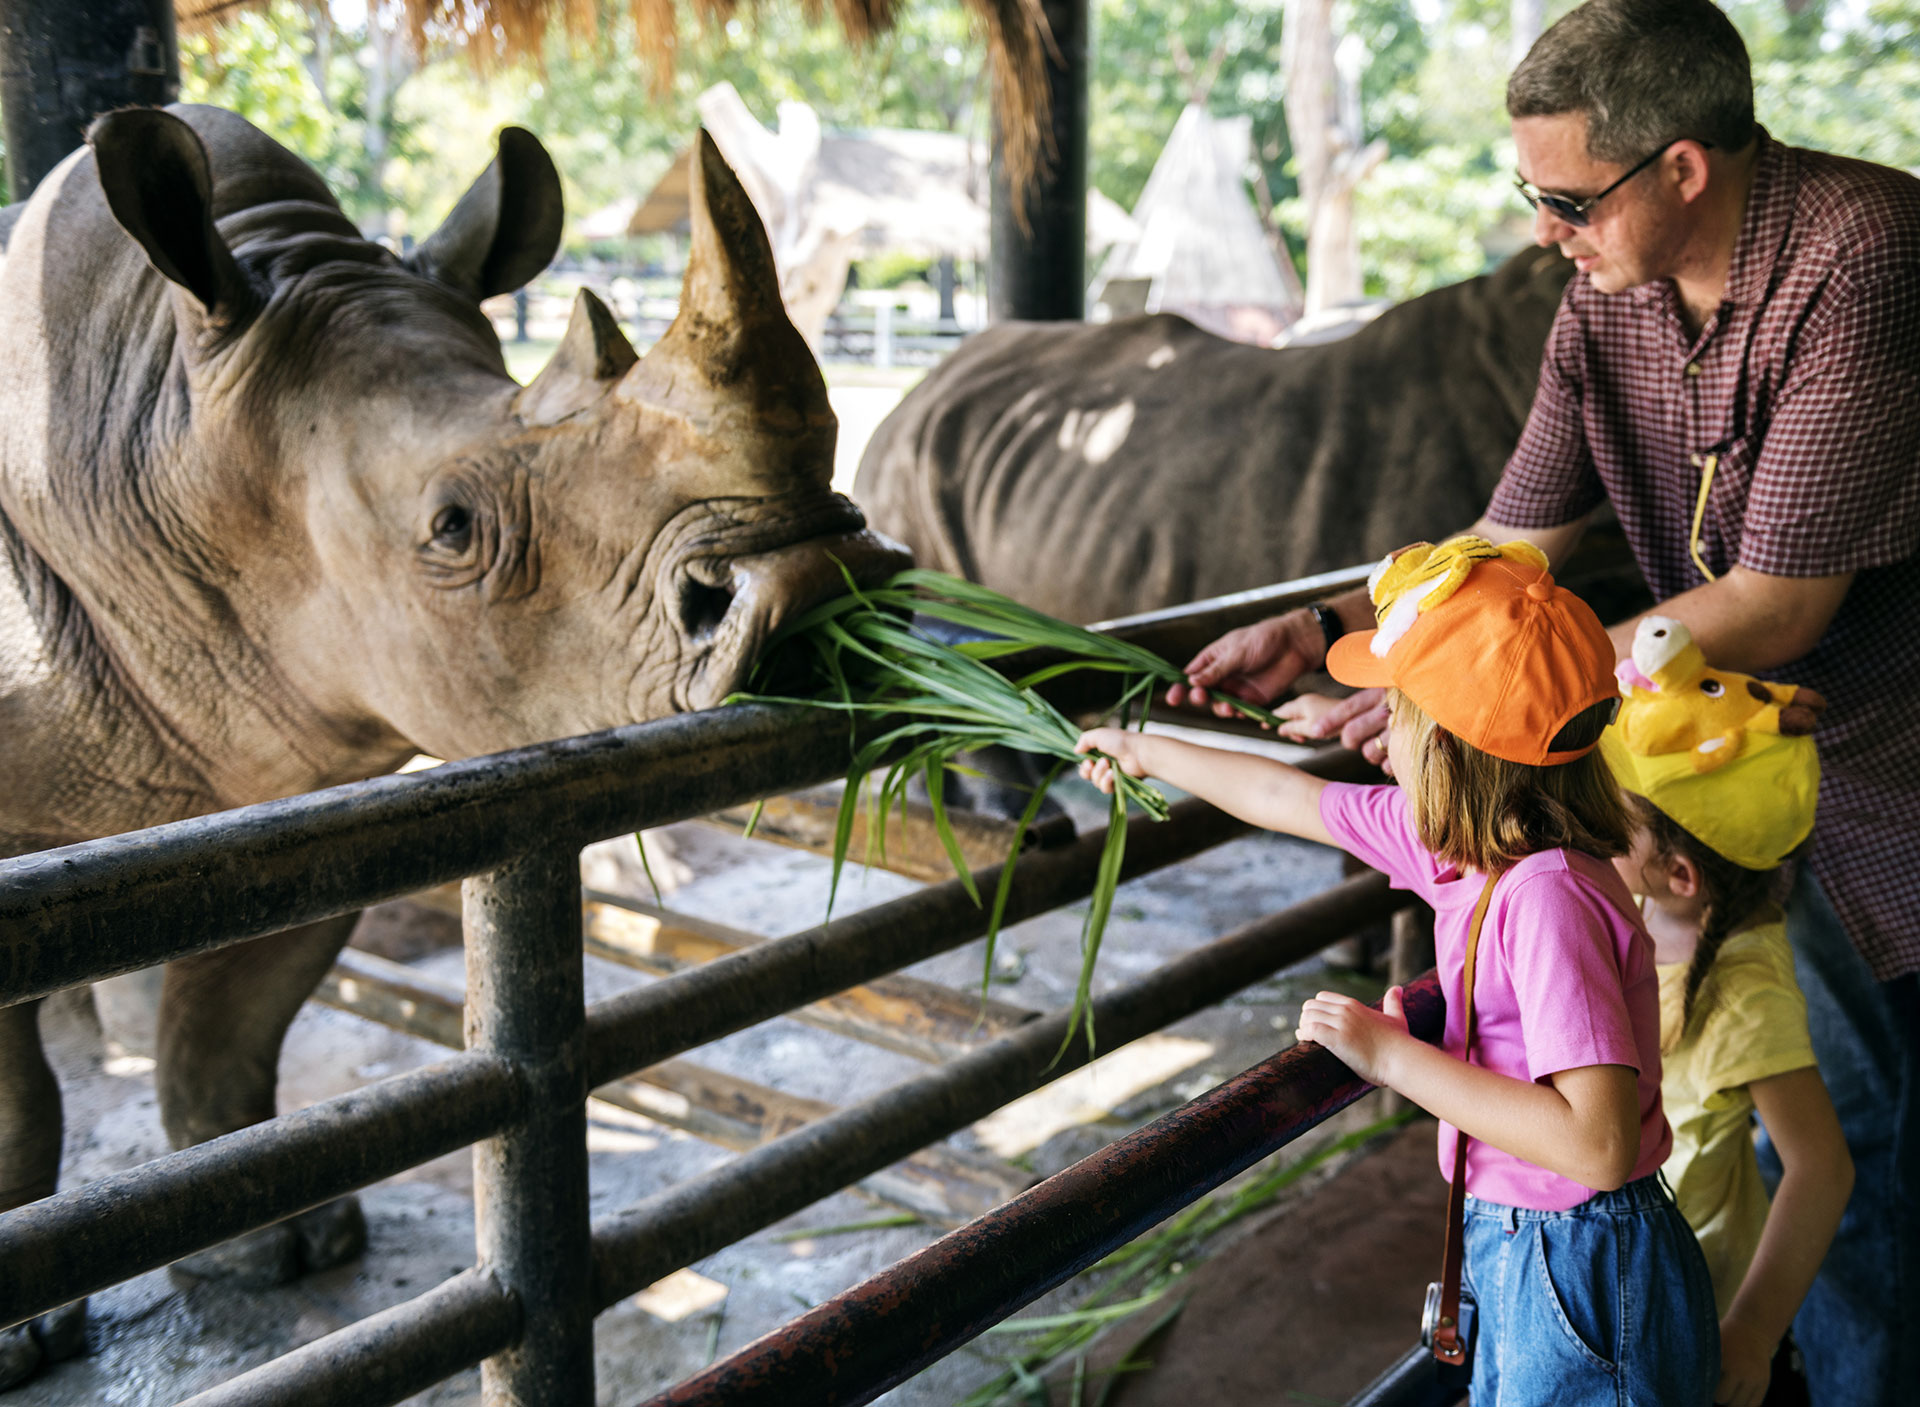 A father with two young children feed a rhinoceros healthy grasses in an interactive educational experience at an accredited zoo or wildlife park.